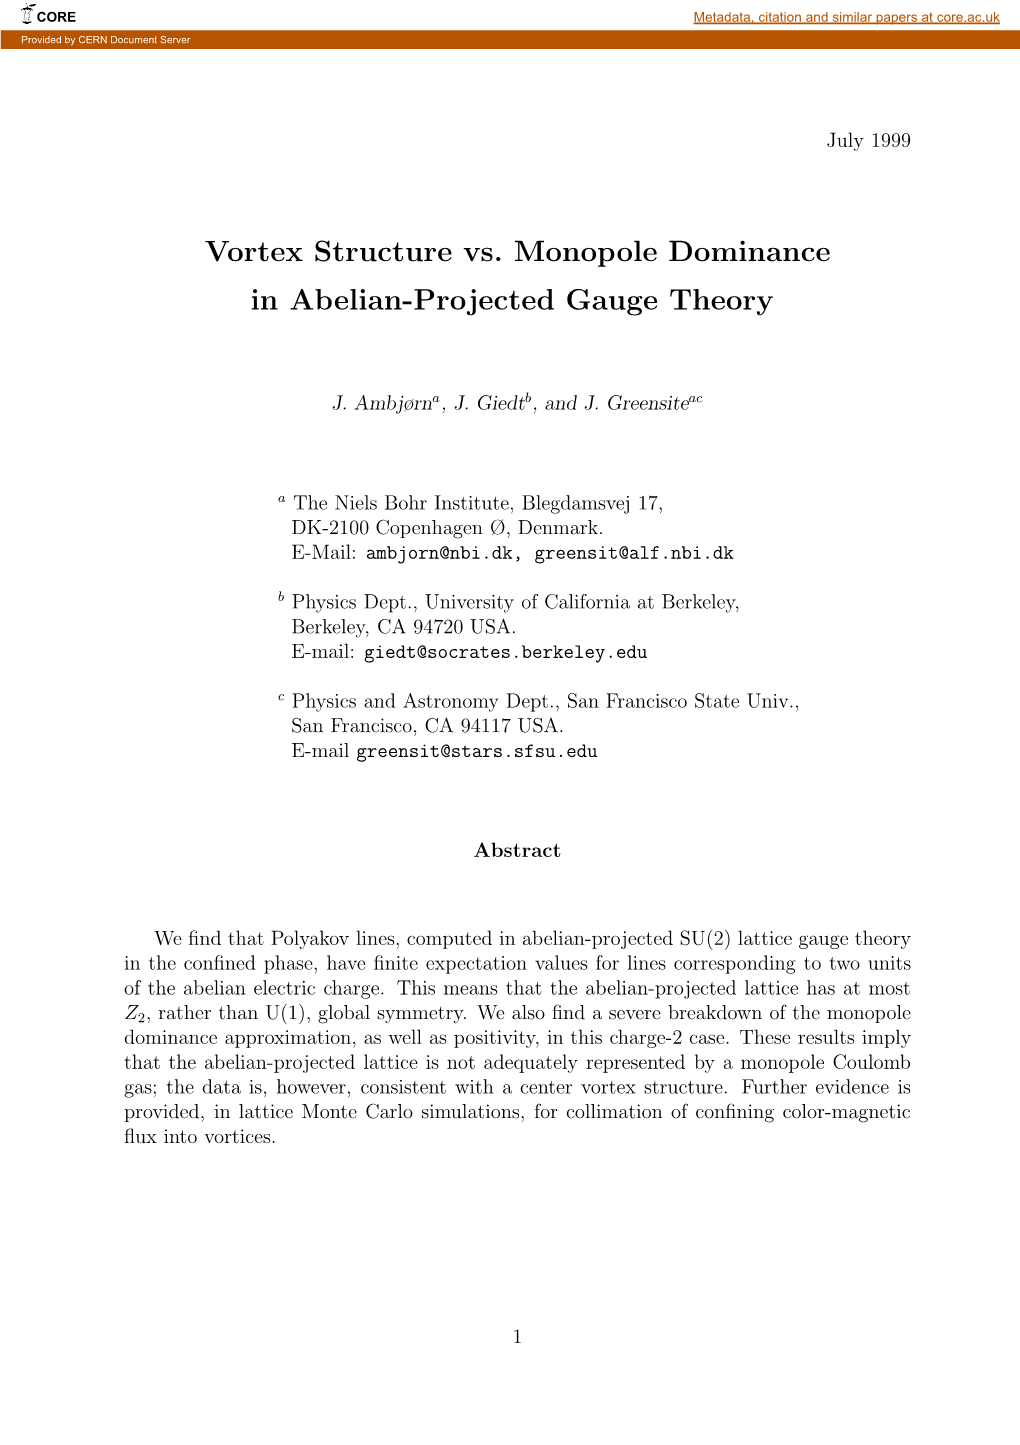 Vortex Structure Vs. Monopole Dominance in Abelian-Projected Gauge Theory